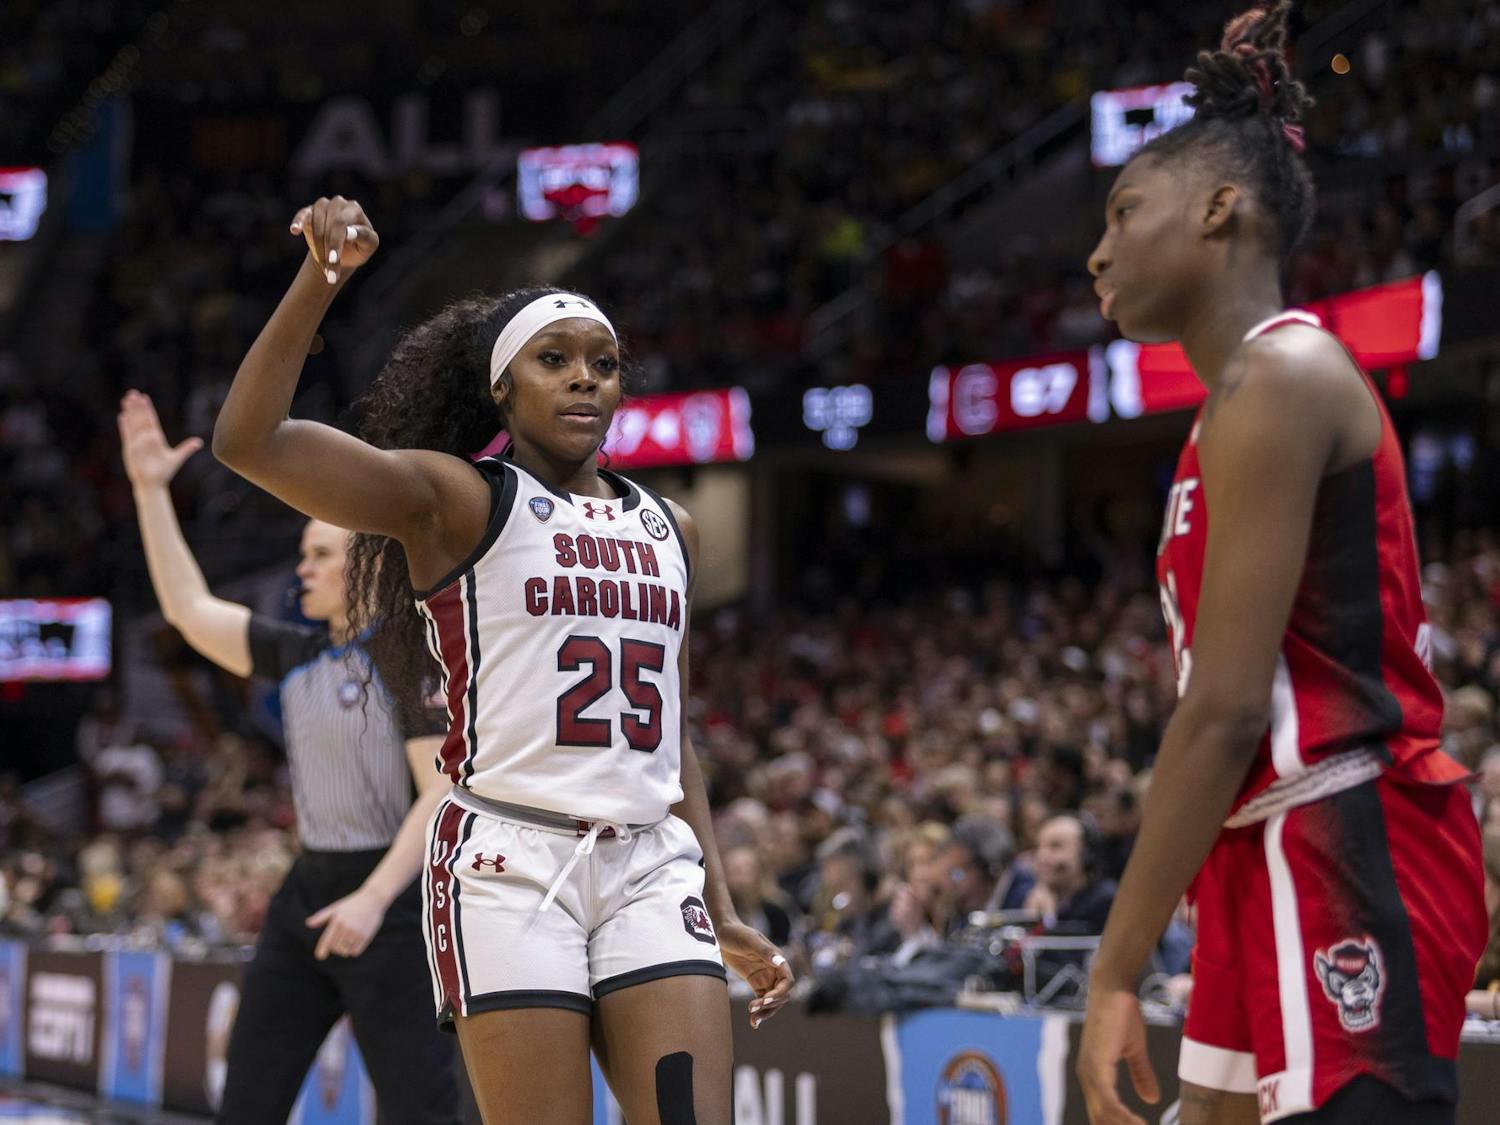 Sophomore guard Raven Johnson stares down former teammate and Wolf Pack junior guard Saniya Rivers after scoring a 3-point shot. Johnson scored 13 points with five assists, helping the Gamecocks advance to the National Championship game.